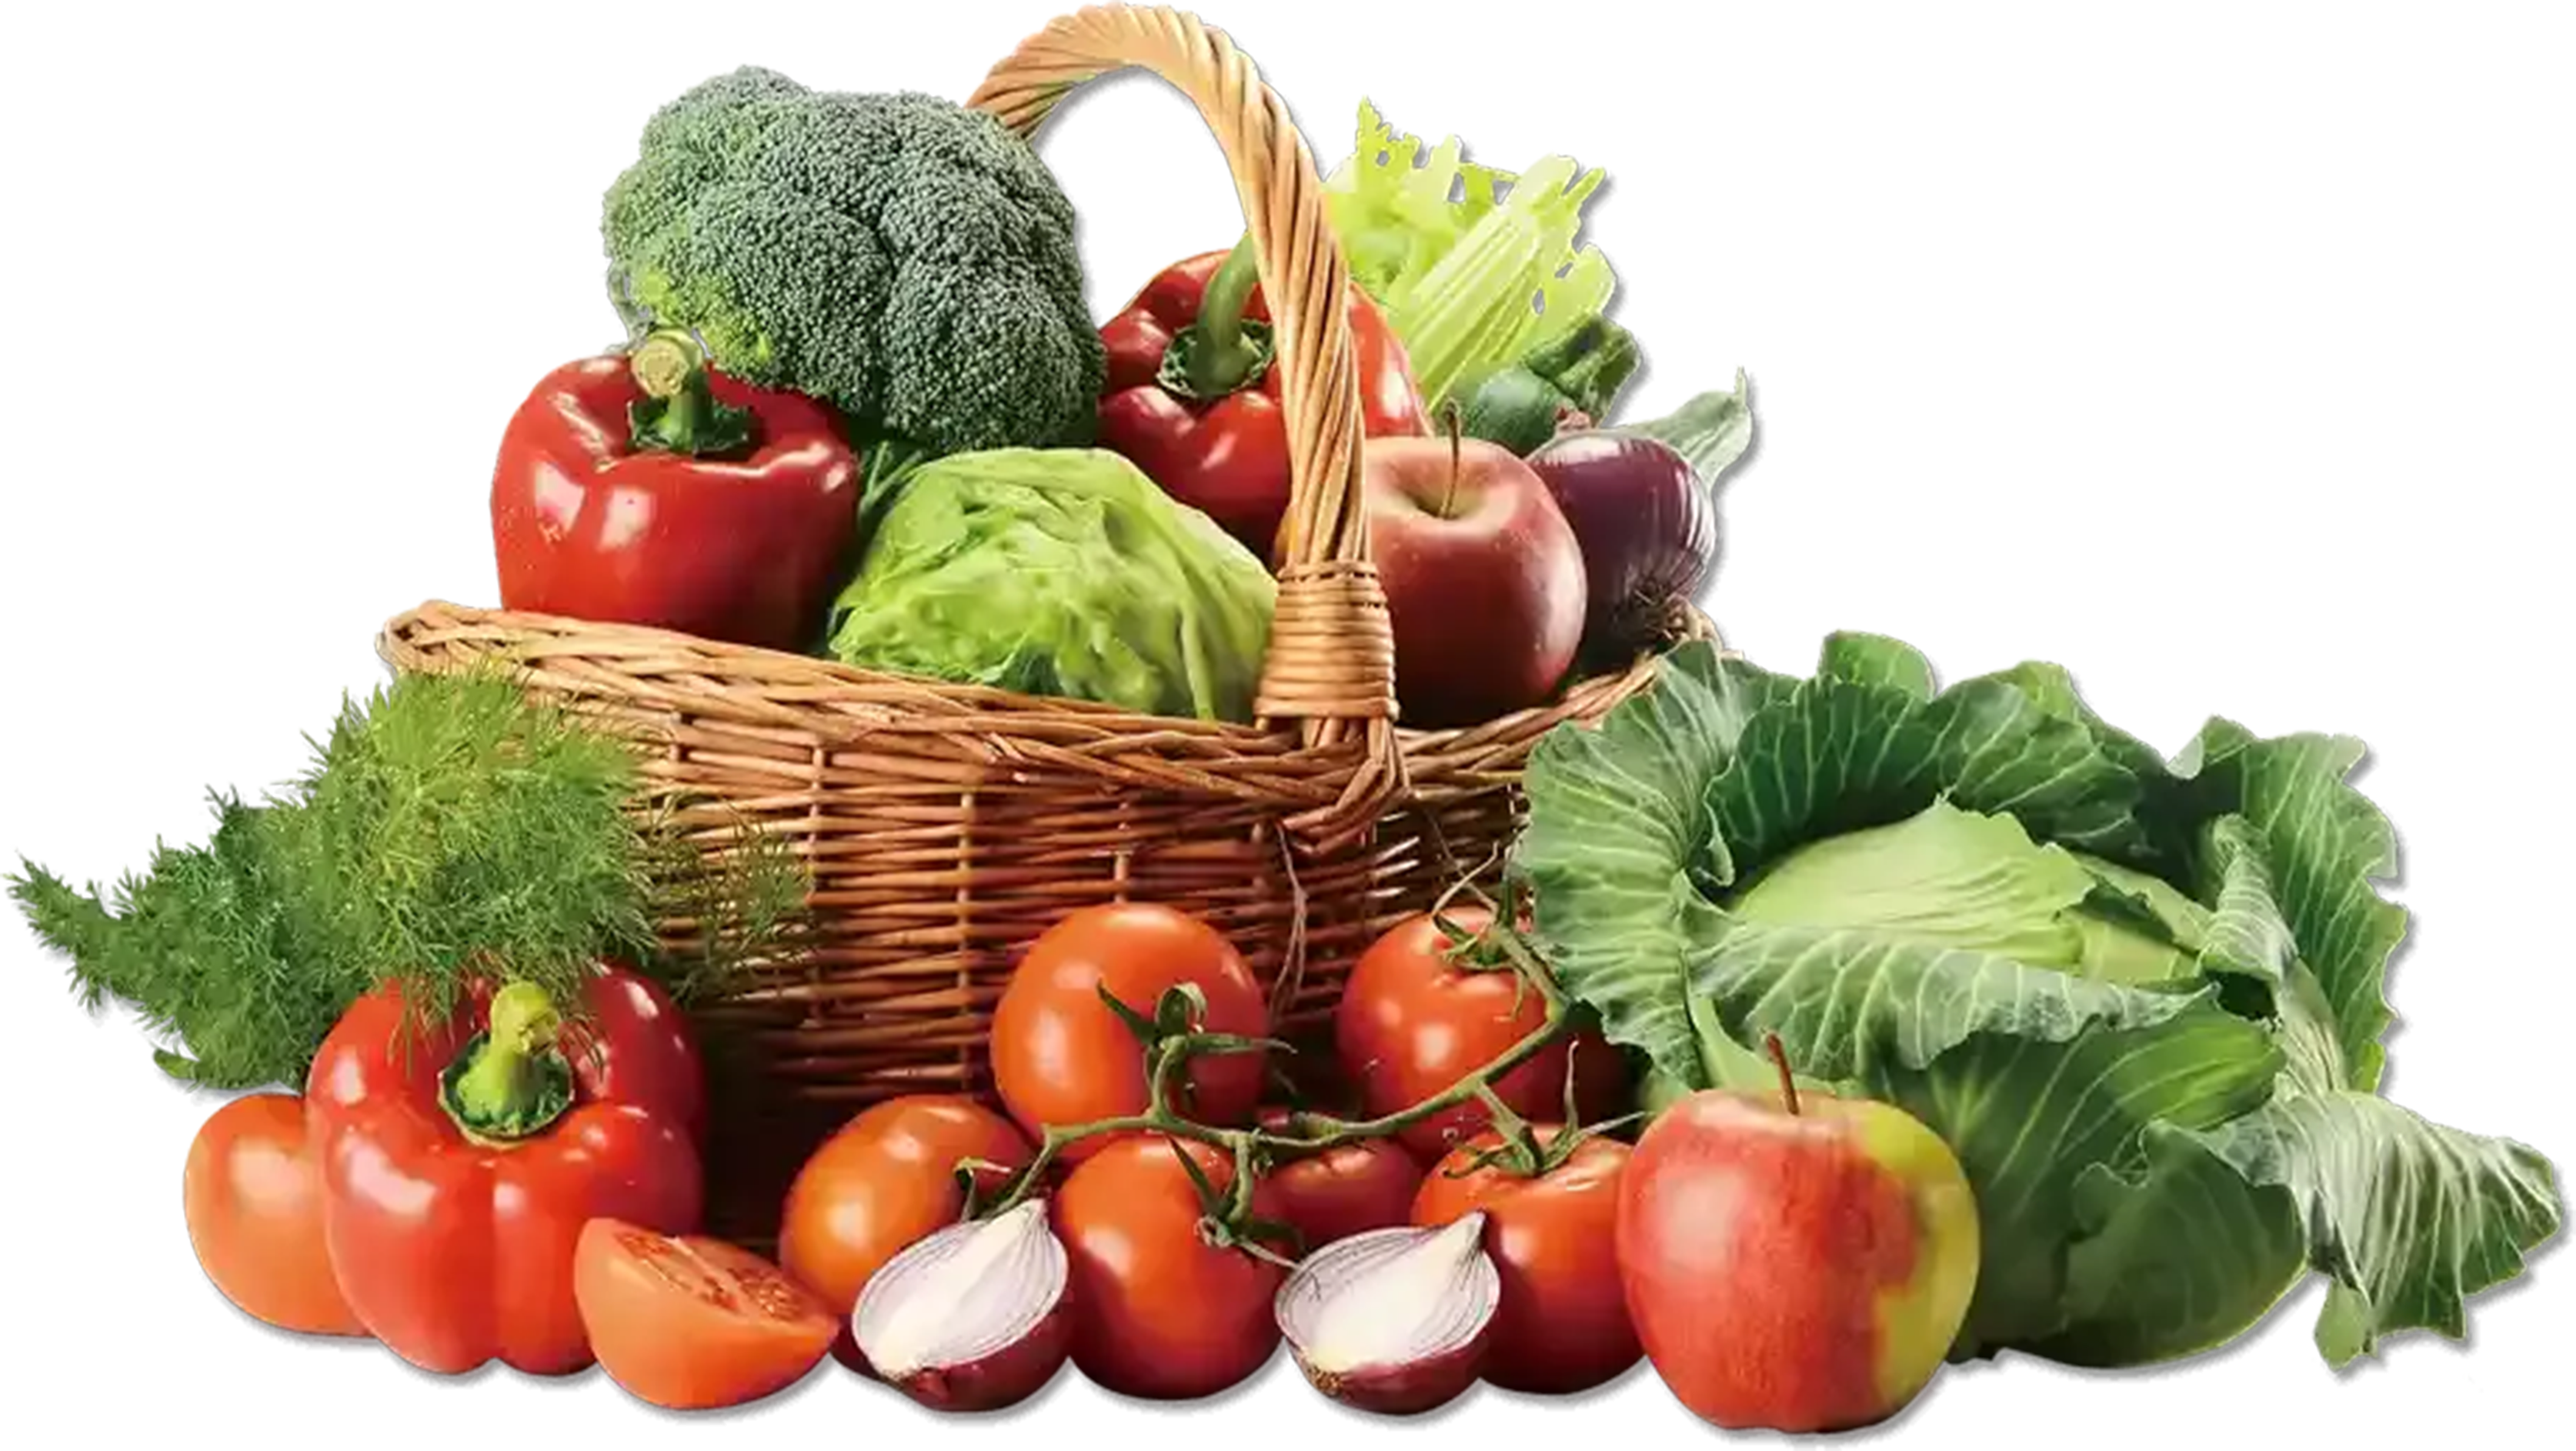 Fruits & Vegetables consultants